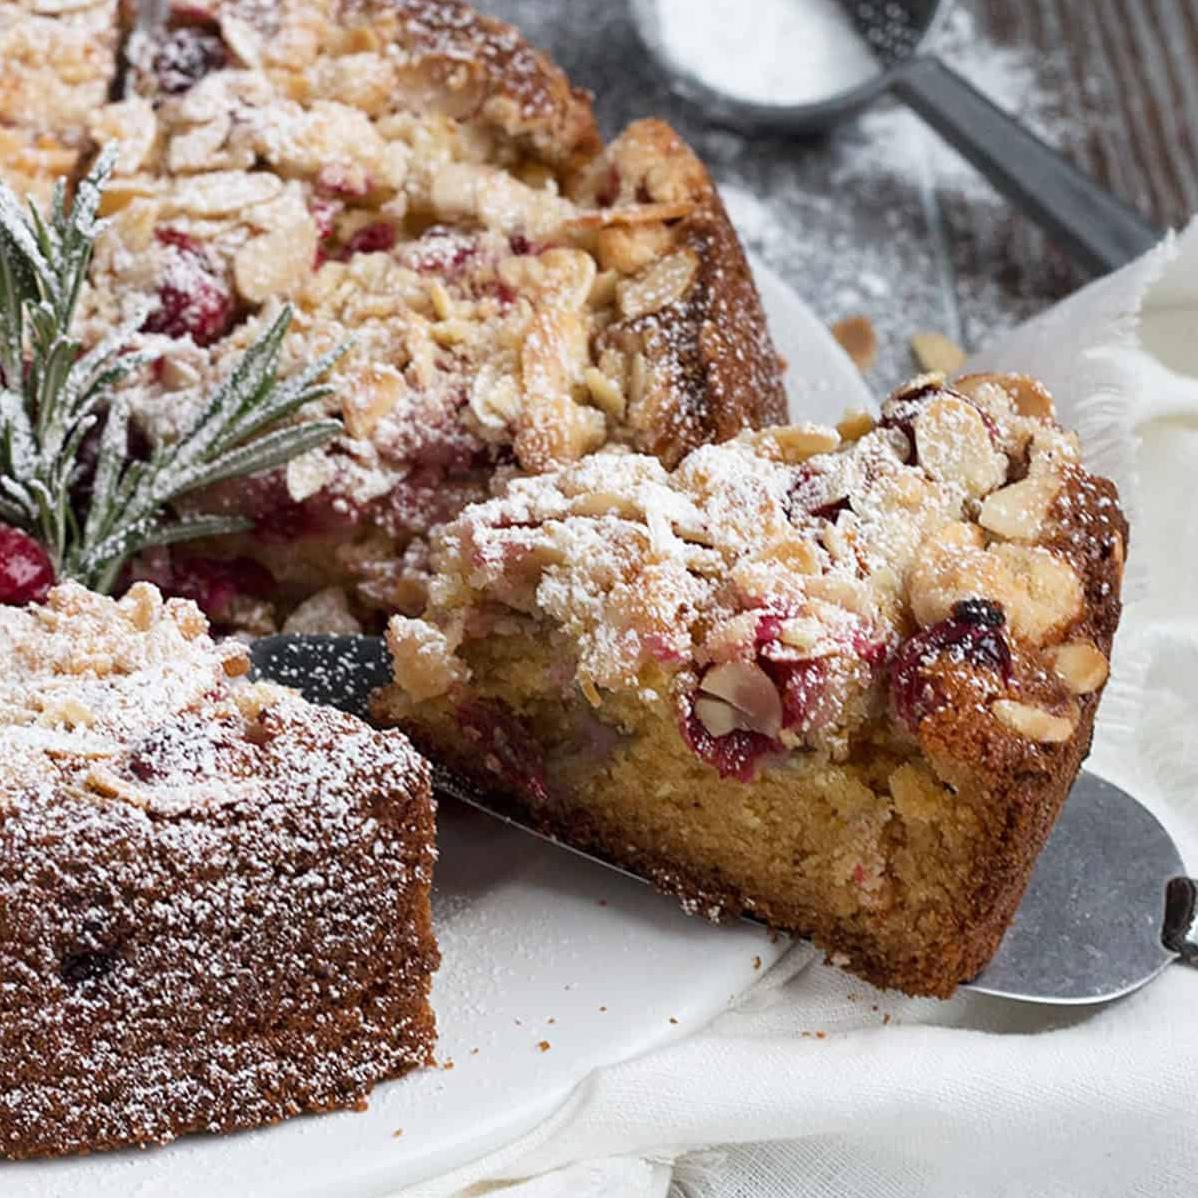  The combination of cranberries and blueberries makes this coffee cake the perfect balance of sweet and tart.